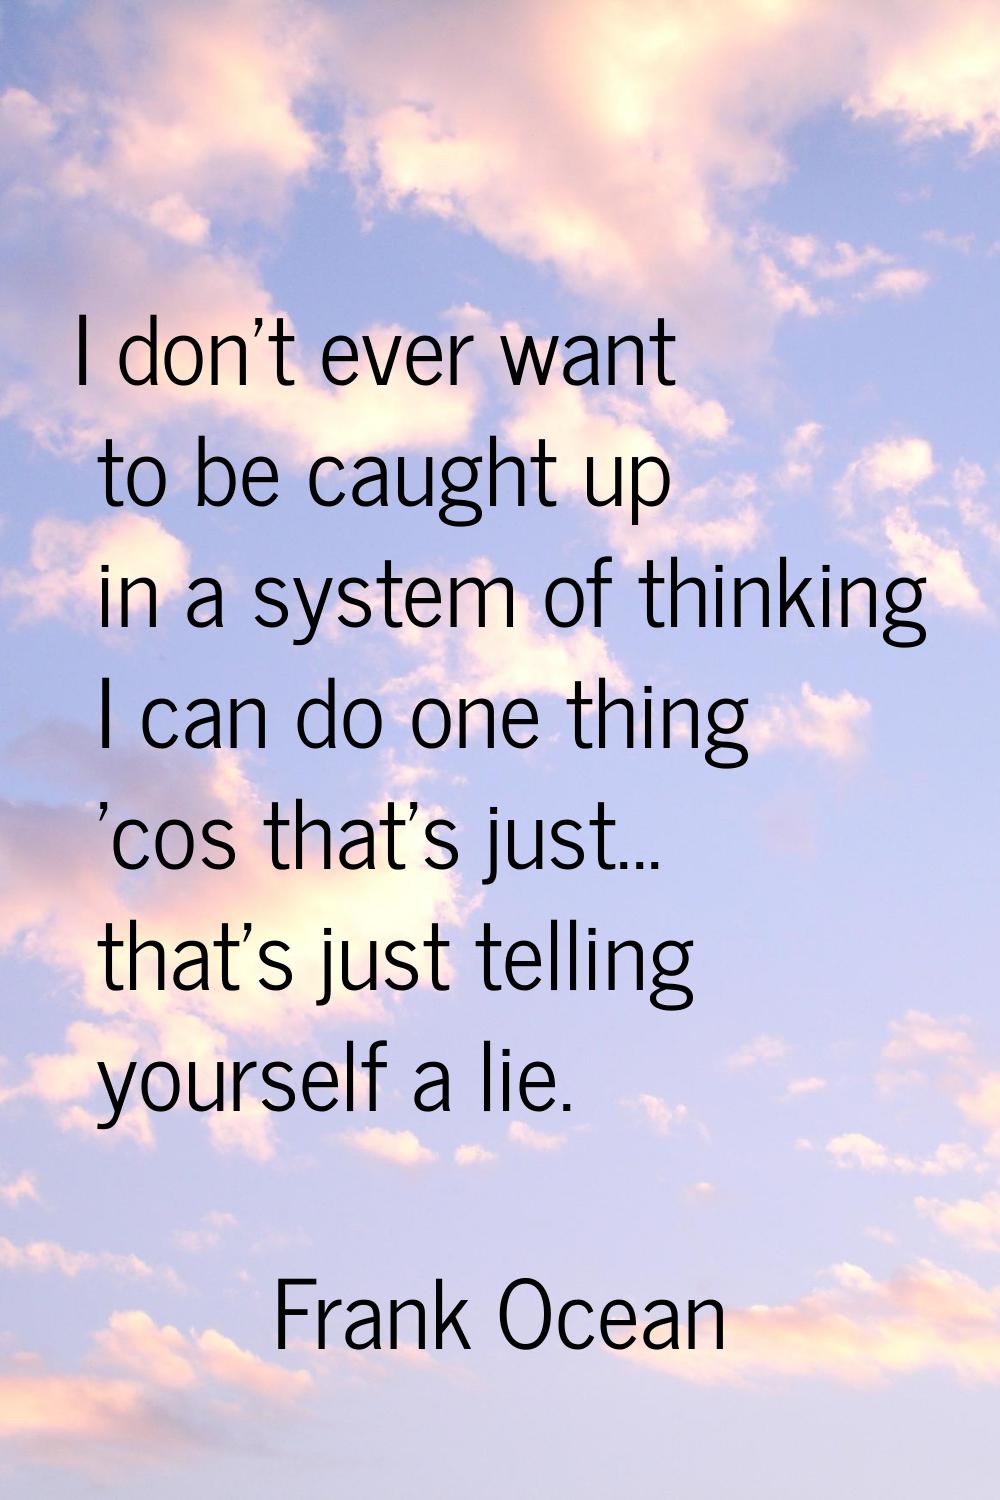 I don't ever want to be caught up in a system of thinking I can do one thing 'cos that's just... th